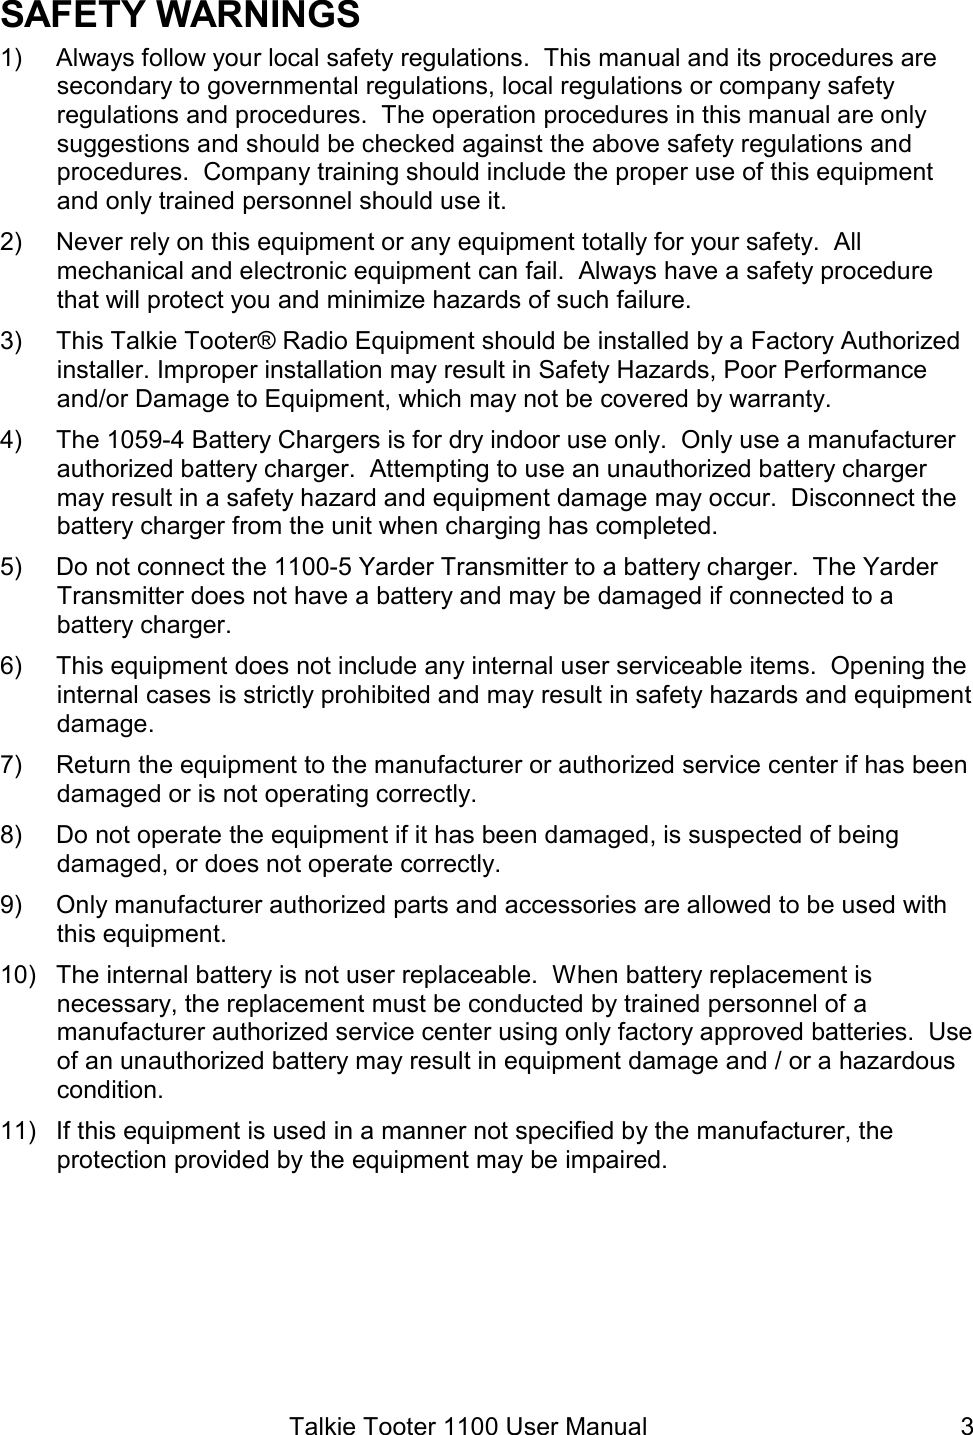 Talkie Tooter 1100 User Manual  3SAFETY WARNINGS 1)  Always follow your local safety regulations.  This manual and its procedures are secondary to governmental regulations, local regulations or company safety regulations and procedures.  The operation procedures in this manual are only suggestions and should be checked against the above safety regulations and procedures.  Company training should include the proper use of this equipment and only trained personnel should use it. 2)  Never rely on this equipment or any equipment totally for your safety.  All mechanical and electronic equipment can fail.  Always have a safety procedure that will protect you and minimize hazards of such failure. 3)  This Talkie Tooter® Radio Equipment should be installed by a Factory Authorized installer. Improper installation may result in Safety Hazards, Poor Performance and/or Damage to Equipment, which may not be covered by warranty. 4)  The 1059-4 Battery Chargers is for dry indoor use only.  Only use a manufacturer authorized battery charger.  Attempting to use an unauthorized battery charger may result in a safety hazard and equipment damage may occur.  Disconnect the battery charger from the unit when charging has completed.   5)  Do not connect the 1100-5 Yarder Transmitter to a battery charger.  The Yarder Transmitter does not have a battery and may be damaged if connected to a battery charger. 6)  This equipment does not include any internal user serviceable items.  Opening the internal cases is strictly prohibited and may result in safety hazards and equipment damage.   7)  Return the equipment to the manufacturer or authorized service center if has been damaged or is not operating correctly.   8)  Do not operate the equipment if it has been damaged, is suspected of being damaged, or does not operate correctly. 9)  Only manufacturer authorized parts and accessories are allowed to be used with this equipment.  10)  The internal battery is not user replaceable.  When battery replacement is necessary, the replacement must be conducted by trained personnel of a manufacturer authorized service center using only factory approved batteries.  Use of an unauthorized battery may result in equipment damage and / or a hazardous condition. 11)  If this equipment is used in a manner not specified by the manufacturer, the protection provided by the equipment may be impaired. 